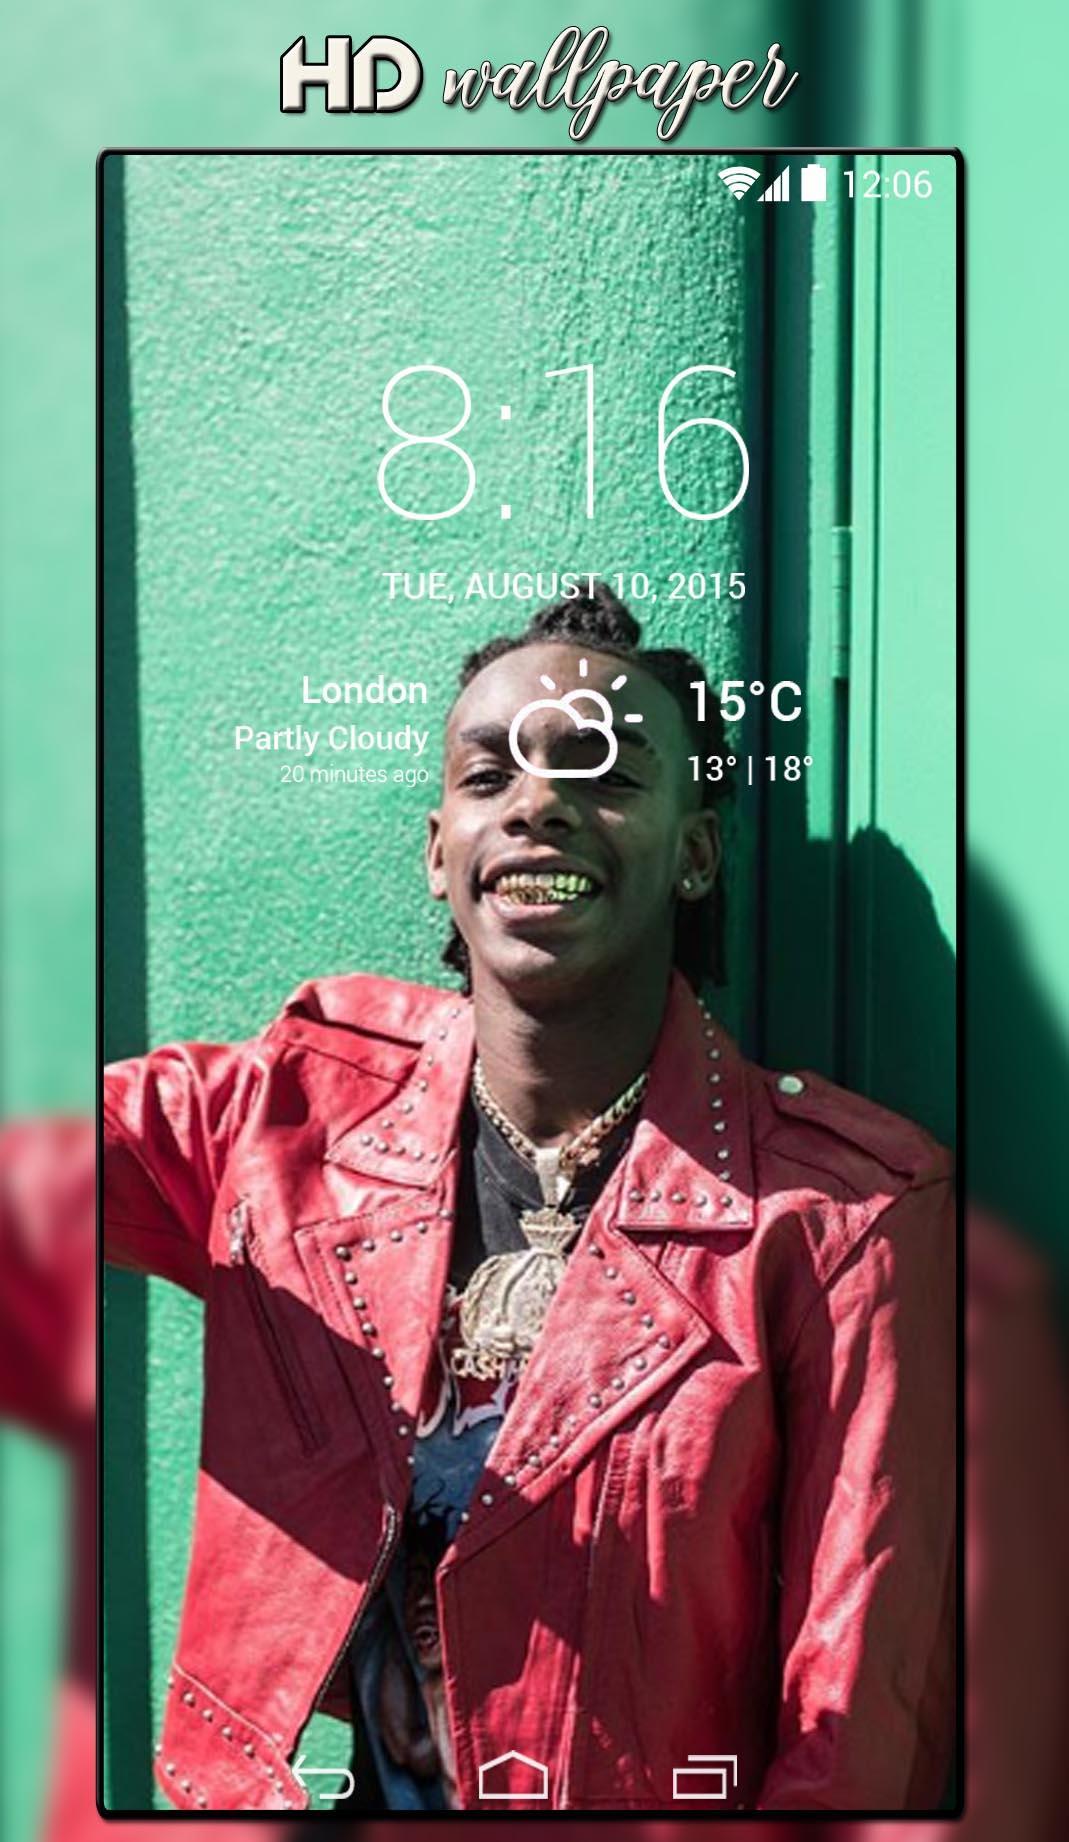 ynw melly iphone hd wallpapers wallpaper cave on ynw melly iphone hd wallpapers